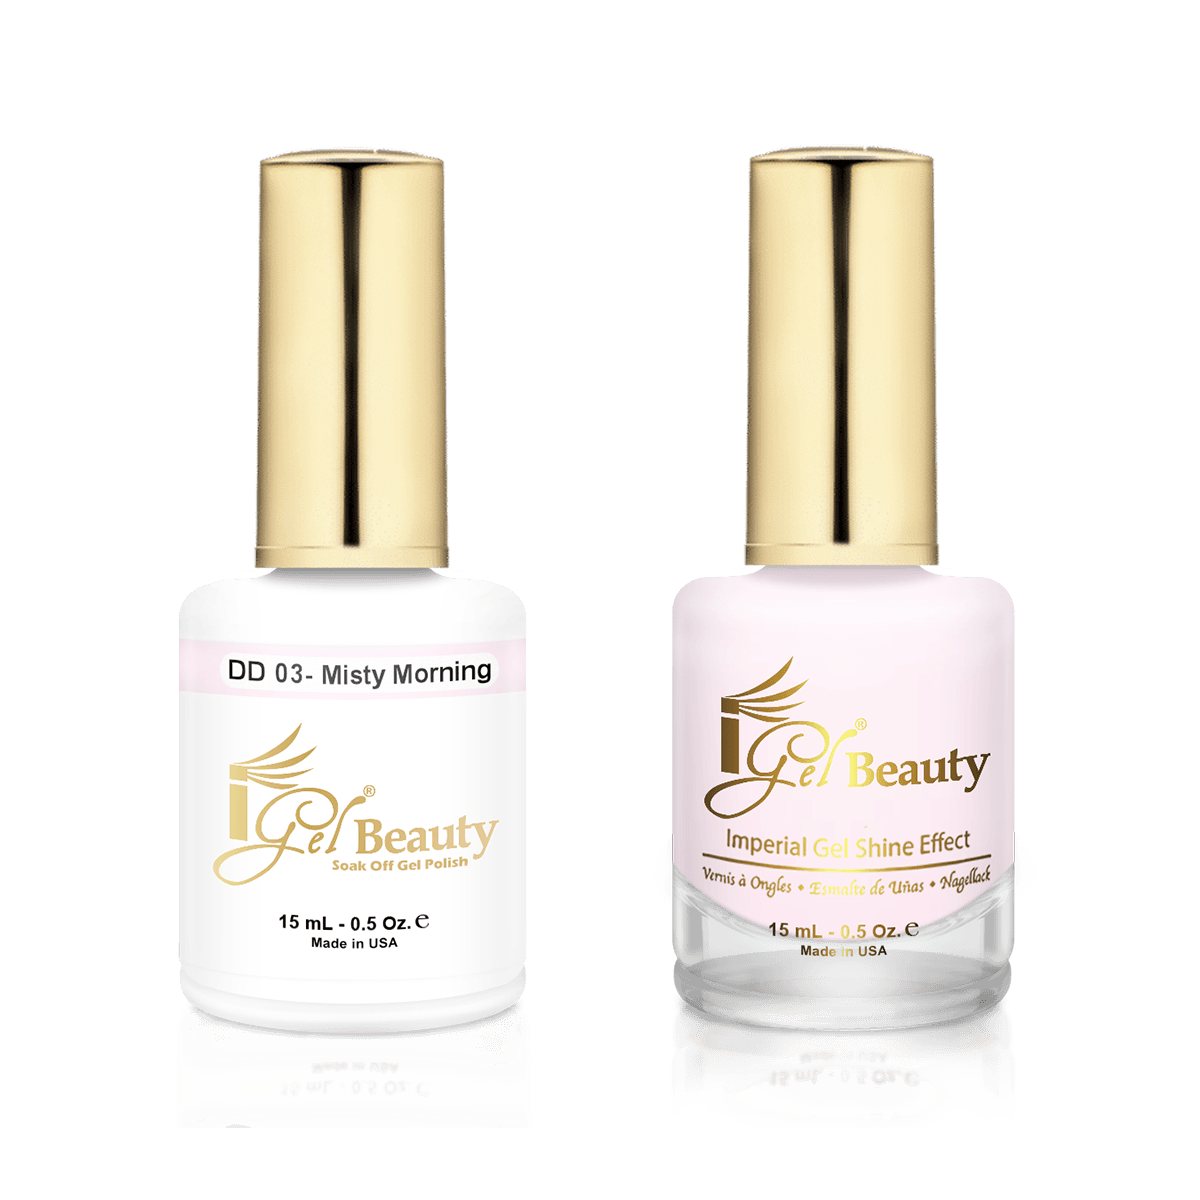 IGel Duo Gel Polish + Matching Nail Lacquer DD 03 MISTY MORNING